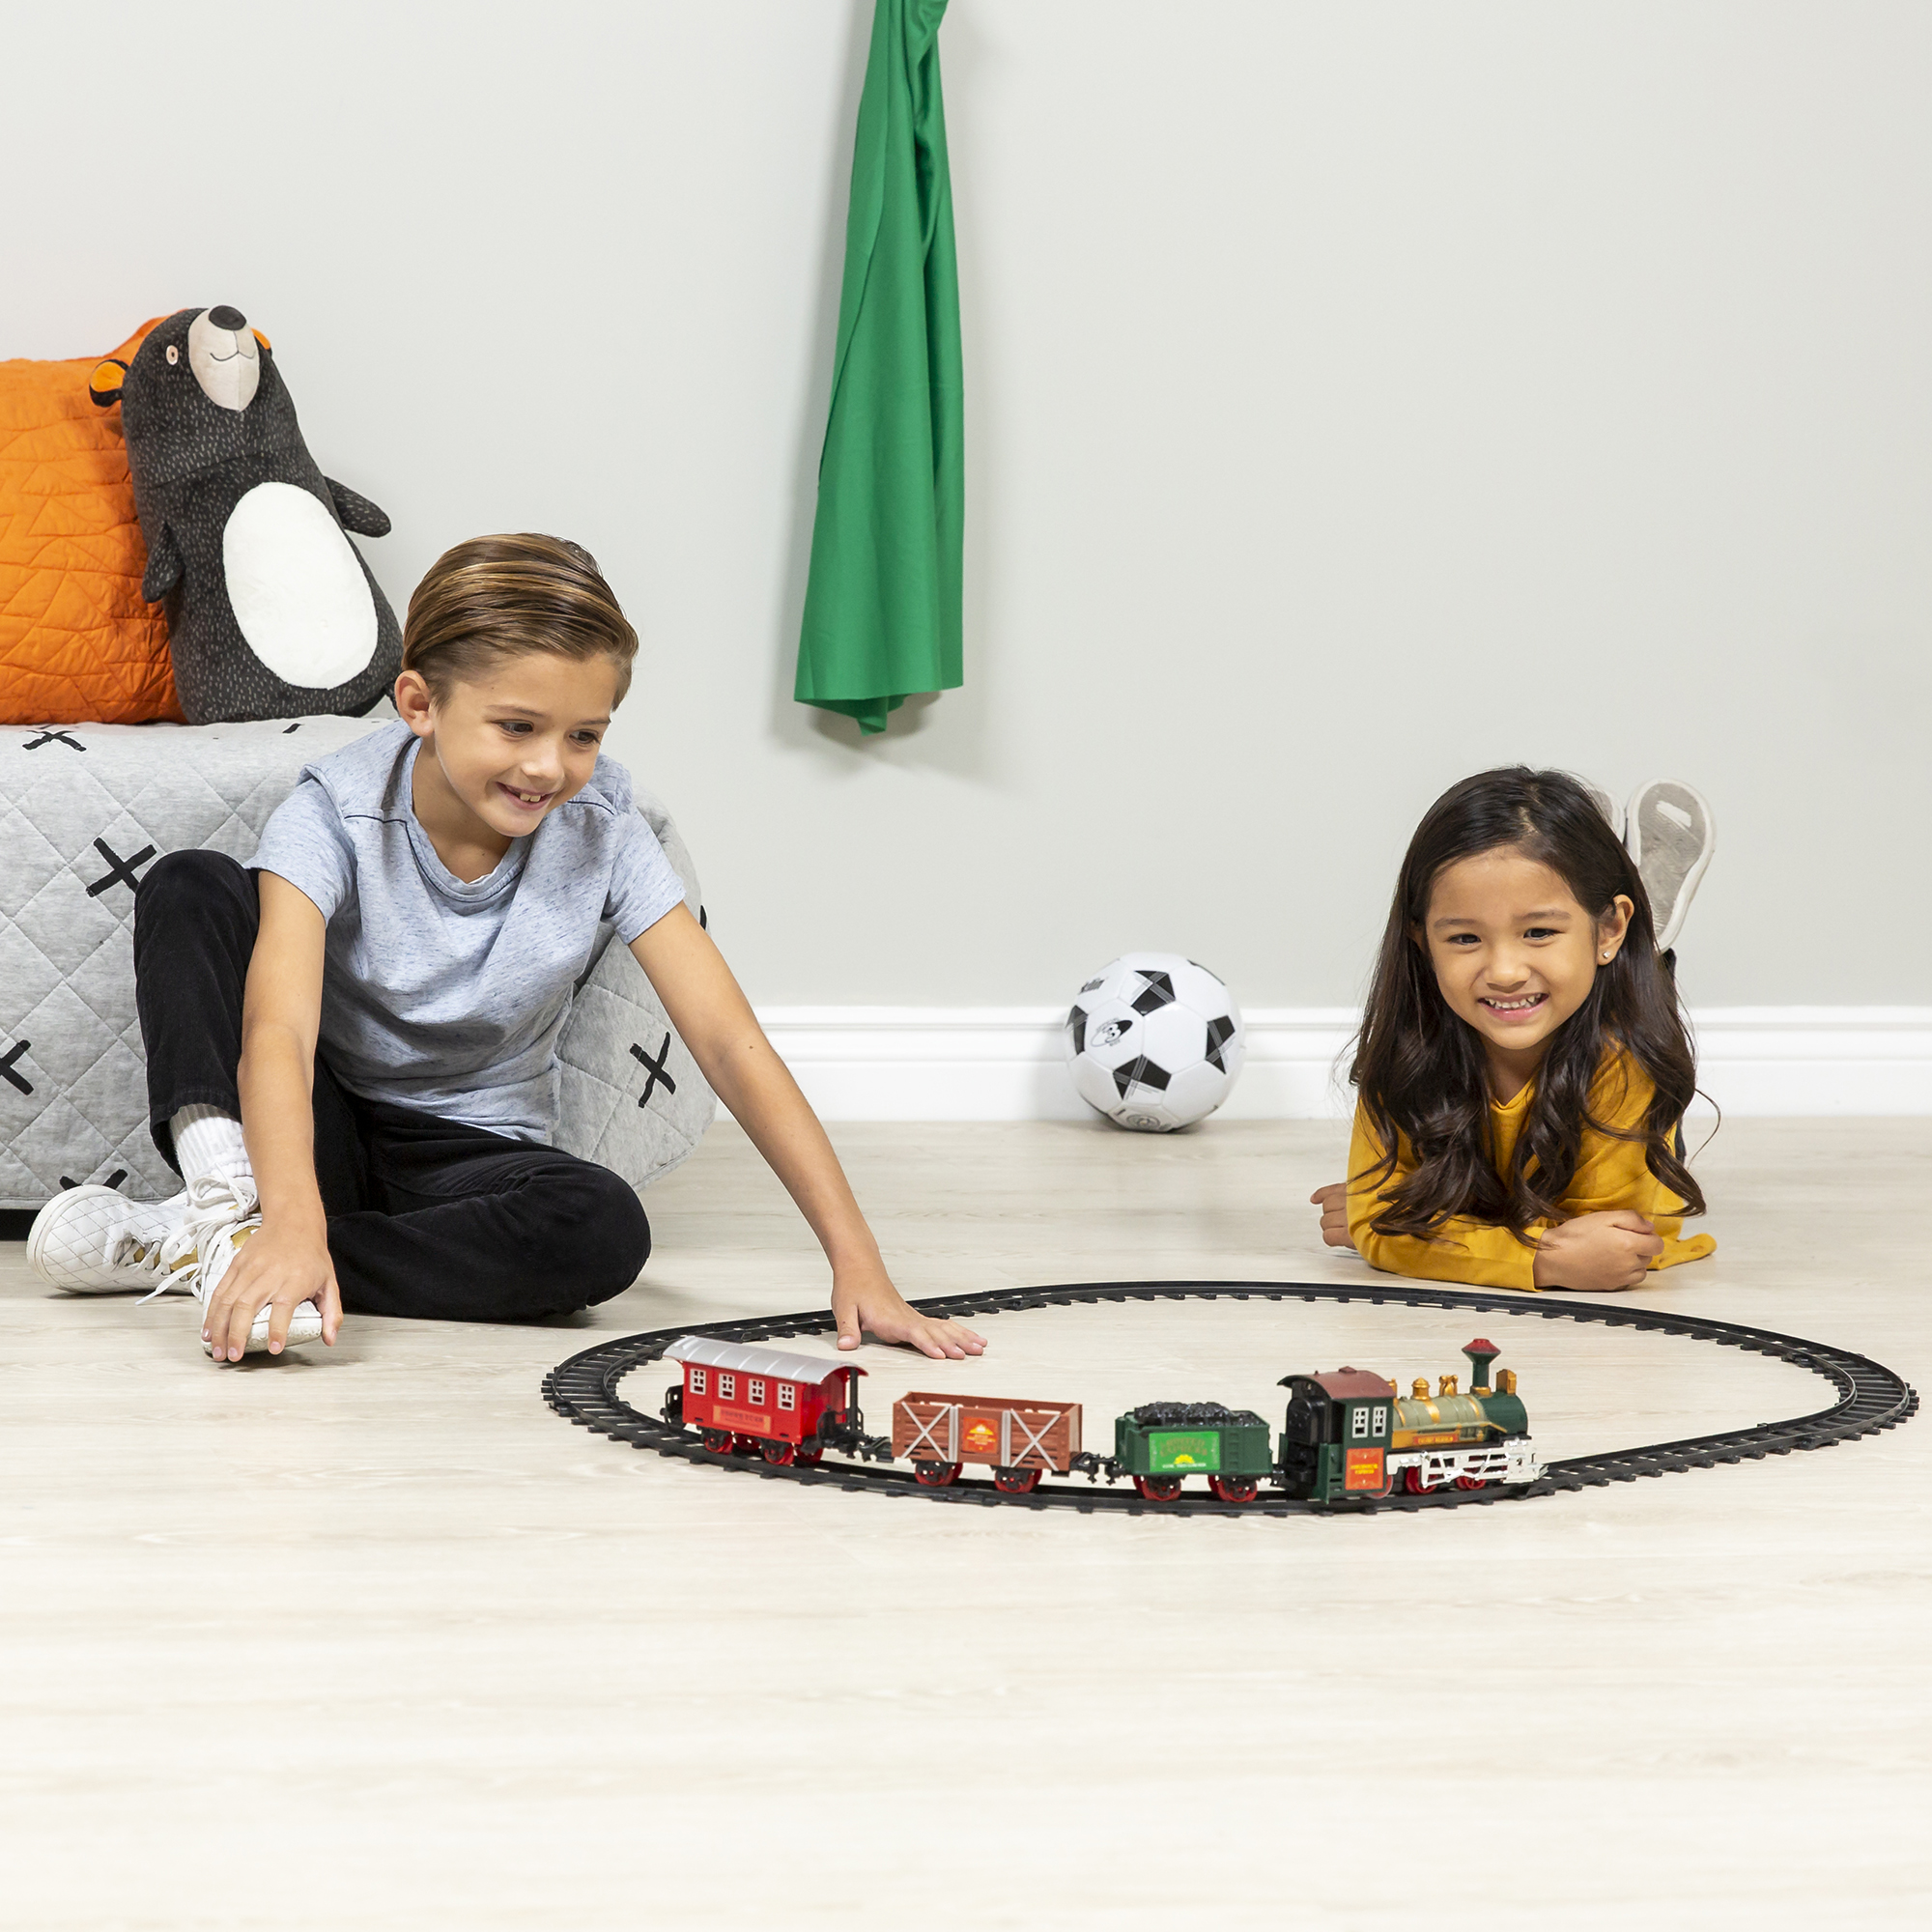 Best Choice Products Kids Classic Electric Railway Train Car Track Play Set Toy w/ Music, Lights - image 2 of 5